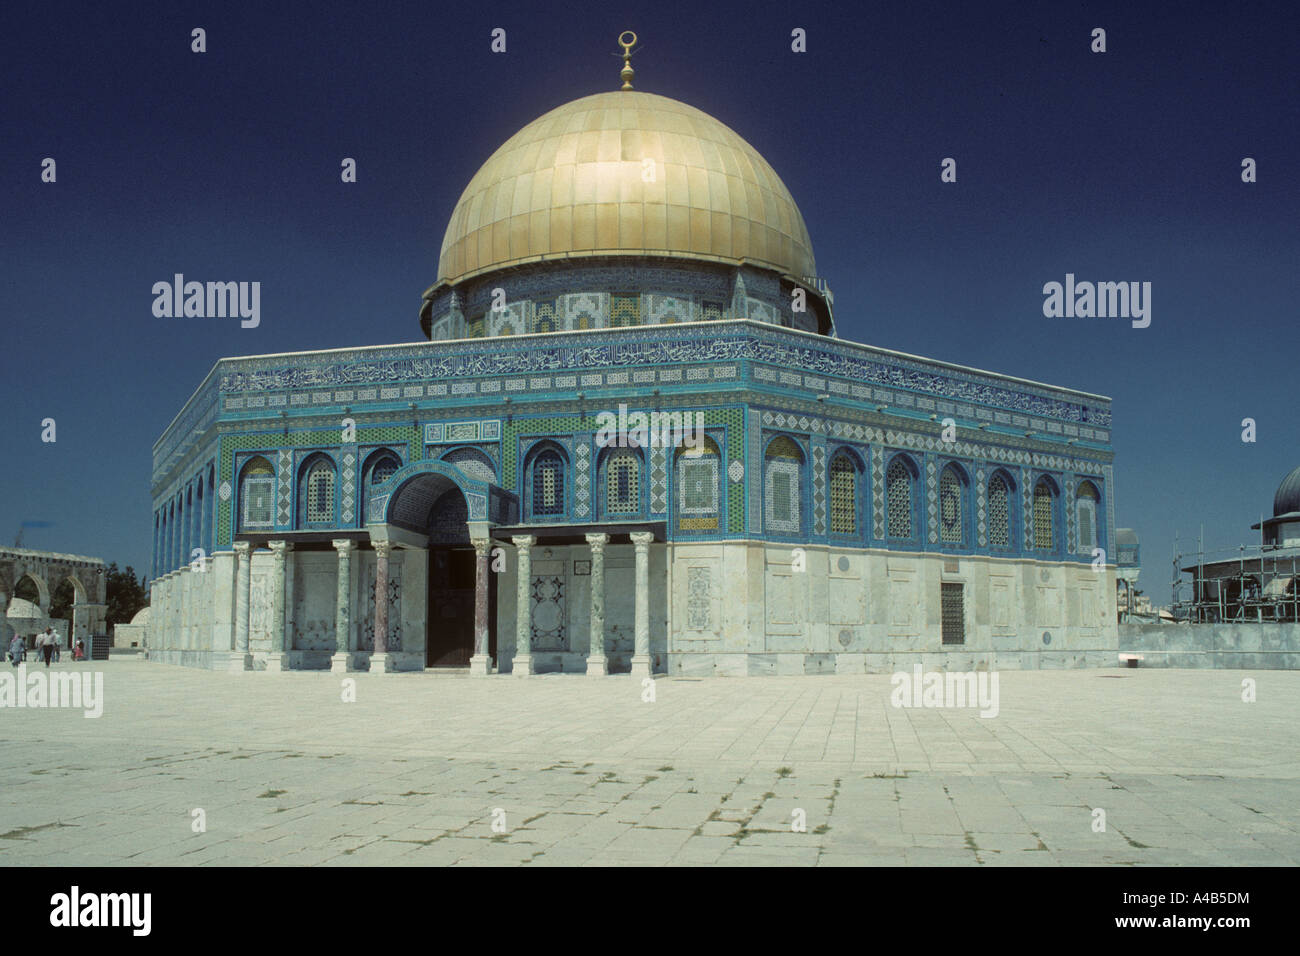 Dome of the Rock Old city of Jerusalem Israel Asia Arabia Built between 687 and 691 by the 9th Caliph Abd al Malik Stock Photo